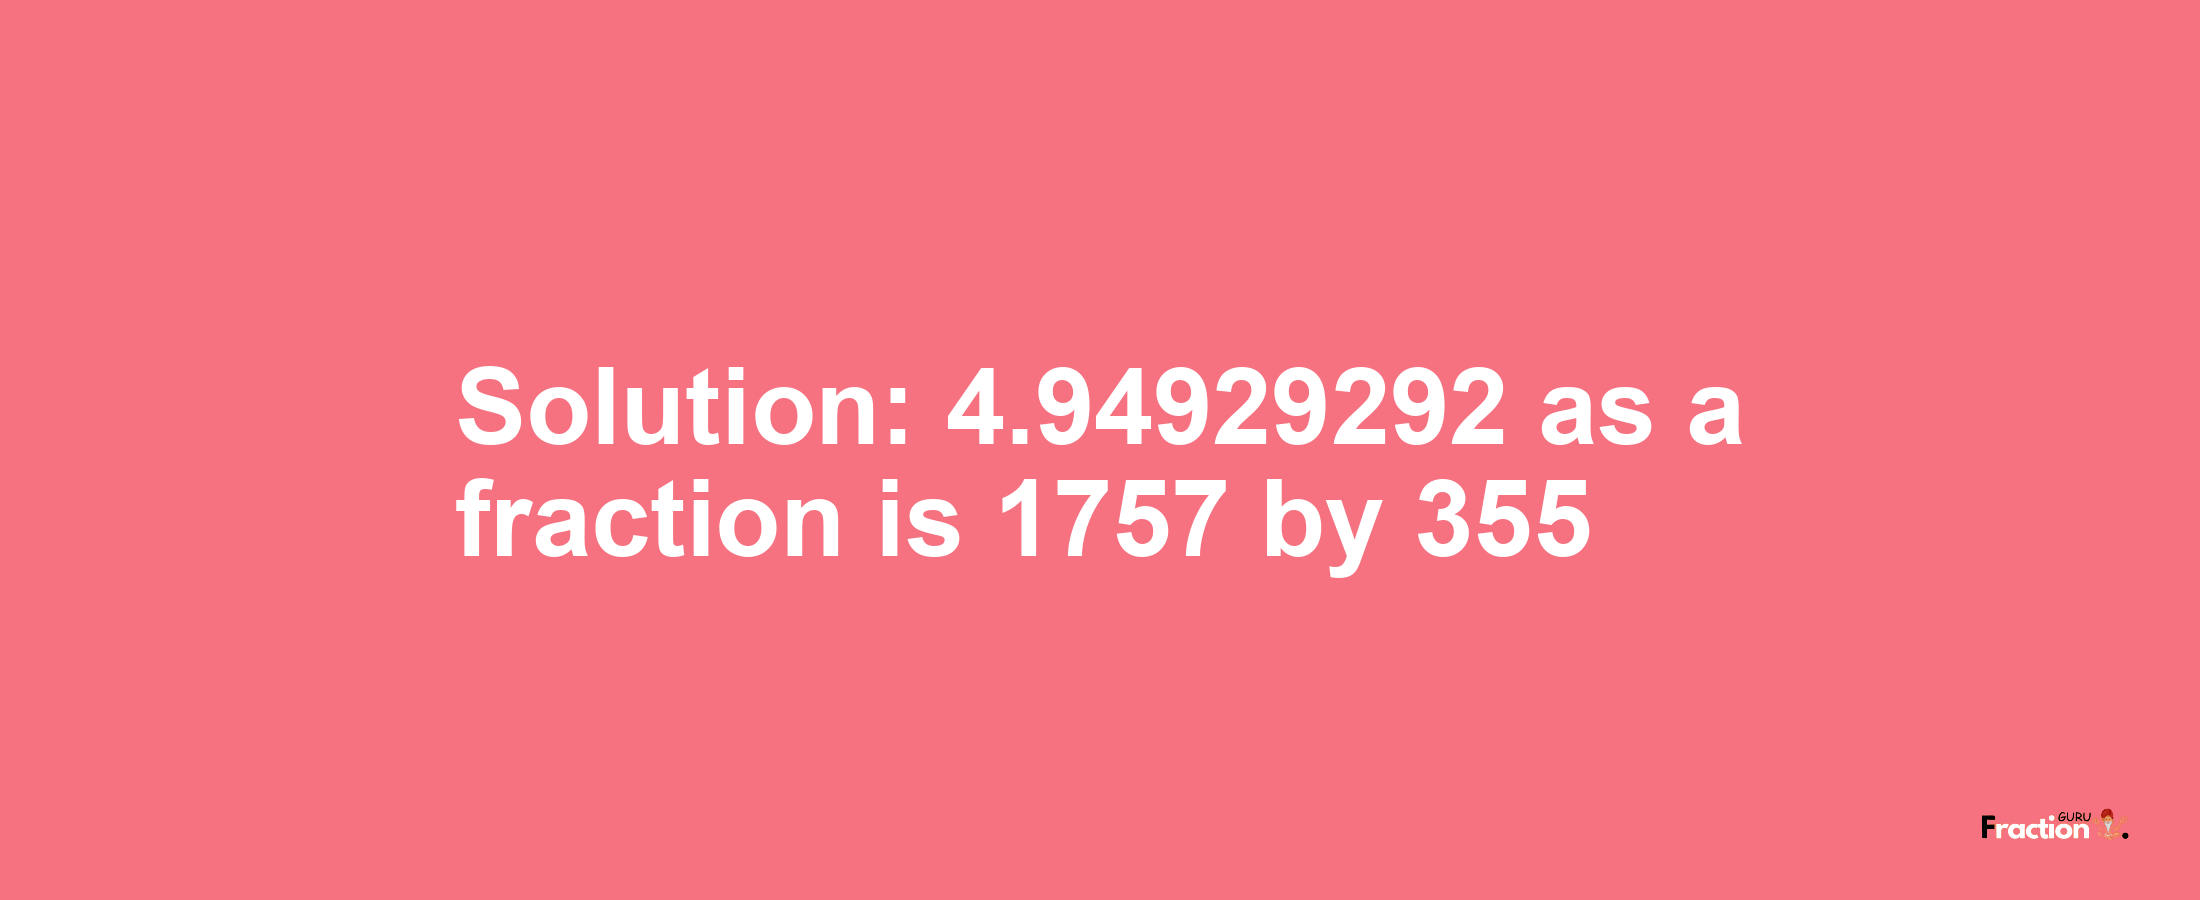 Solution:4.94929292 as a fraction is 1757/355